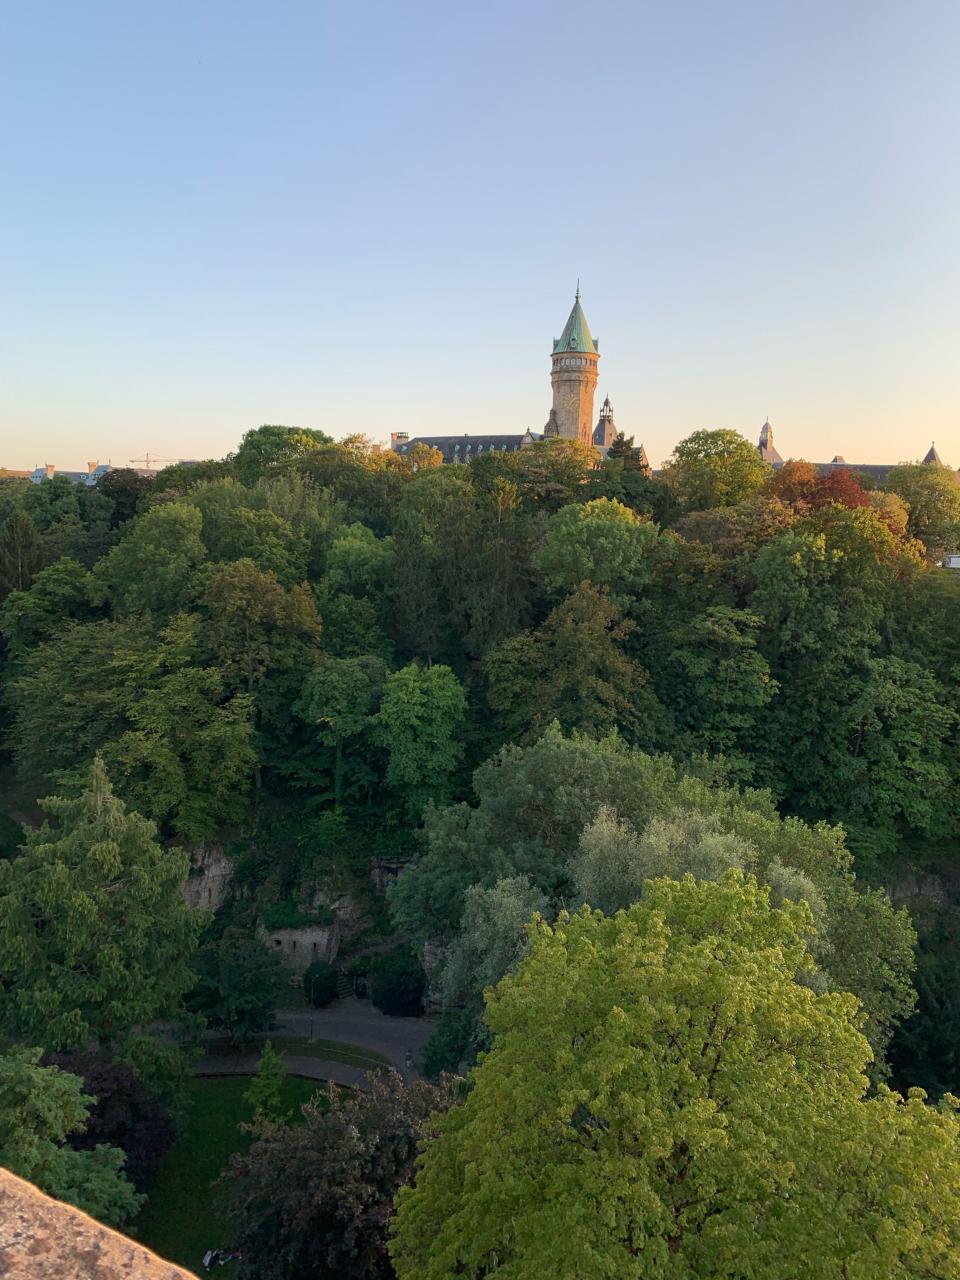 Views over the bridge near Gelle Fra offer spectacular views of the trees and an overlook of Luxembourg City. This photo was taken on Sept. 21, 2019. | Sarah Gambles, Deseret News